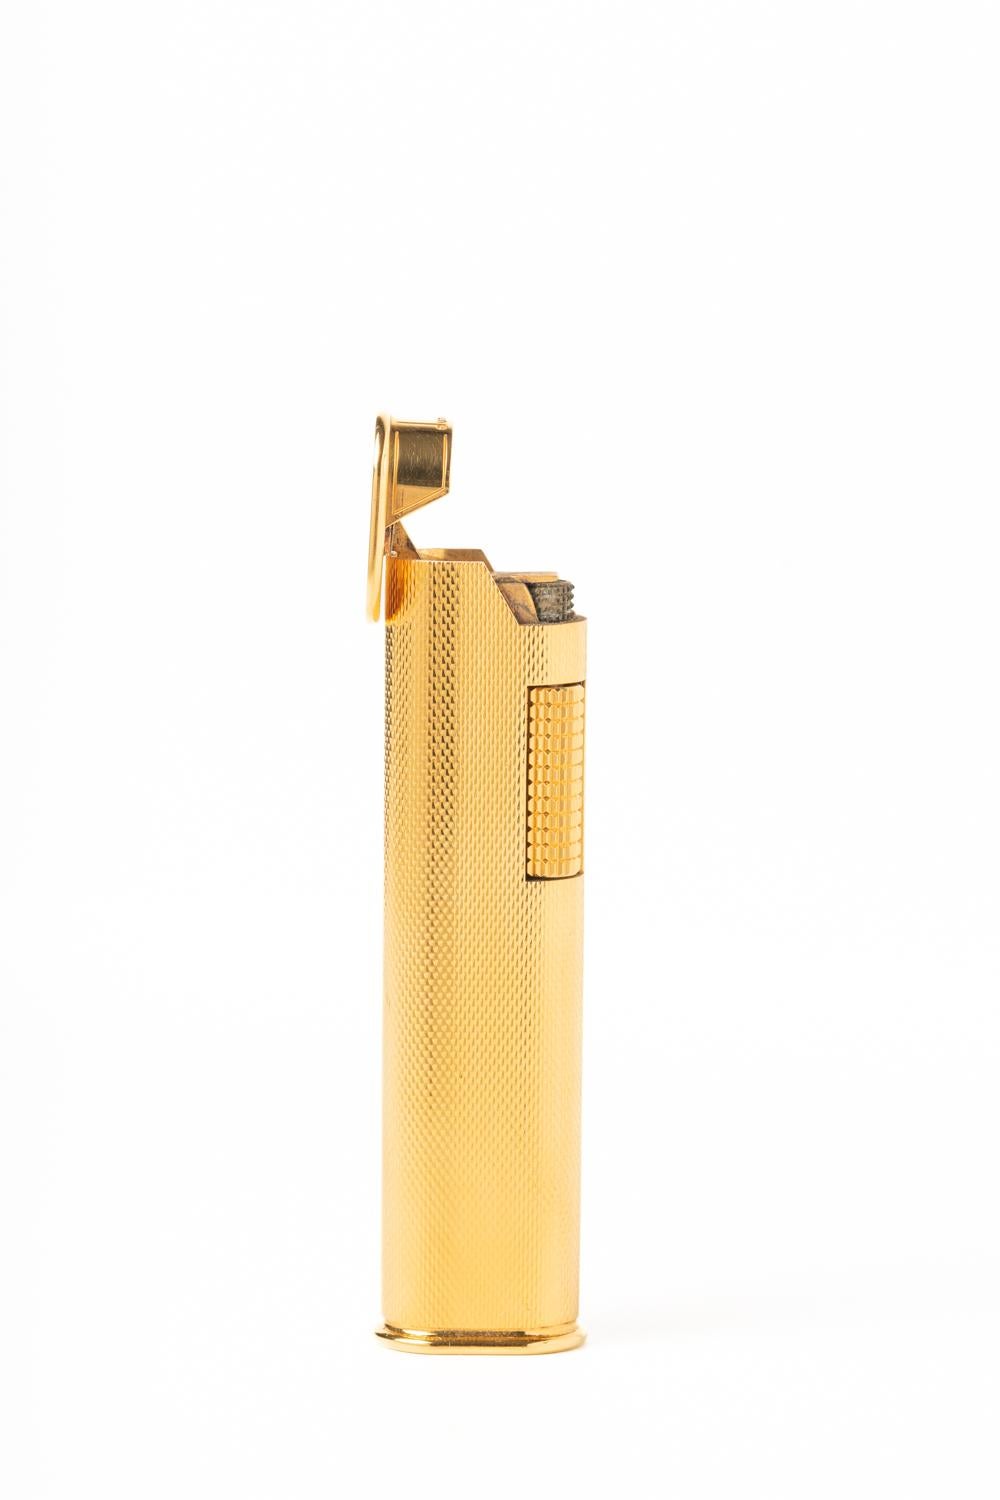 Rare Dunhill Gold Plated Slim Lighter 1